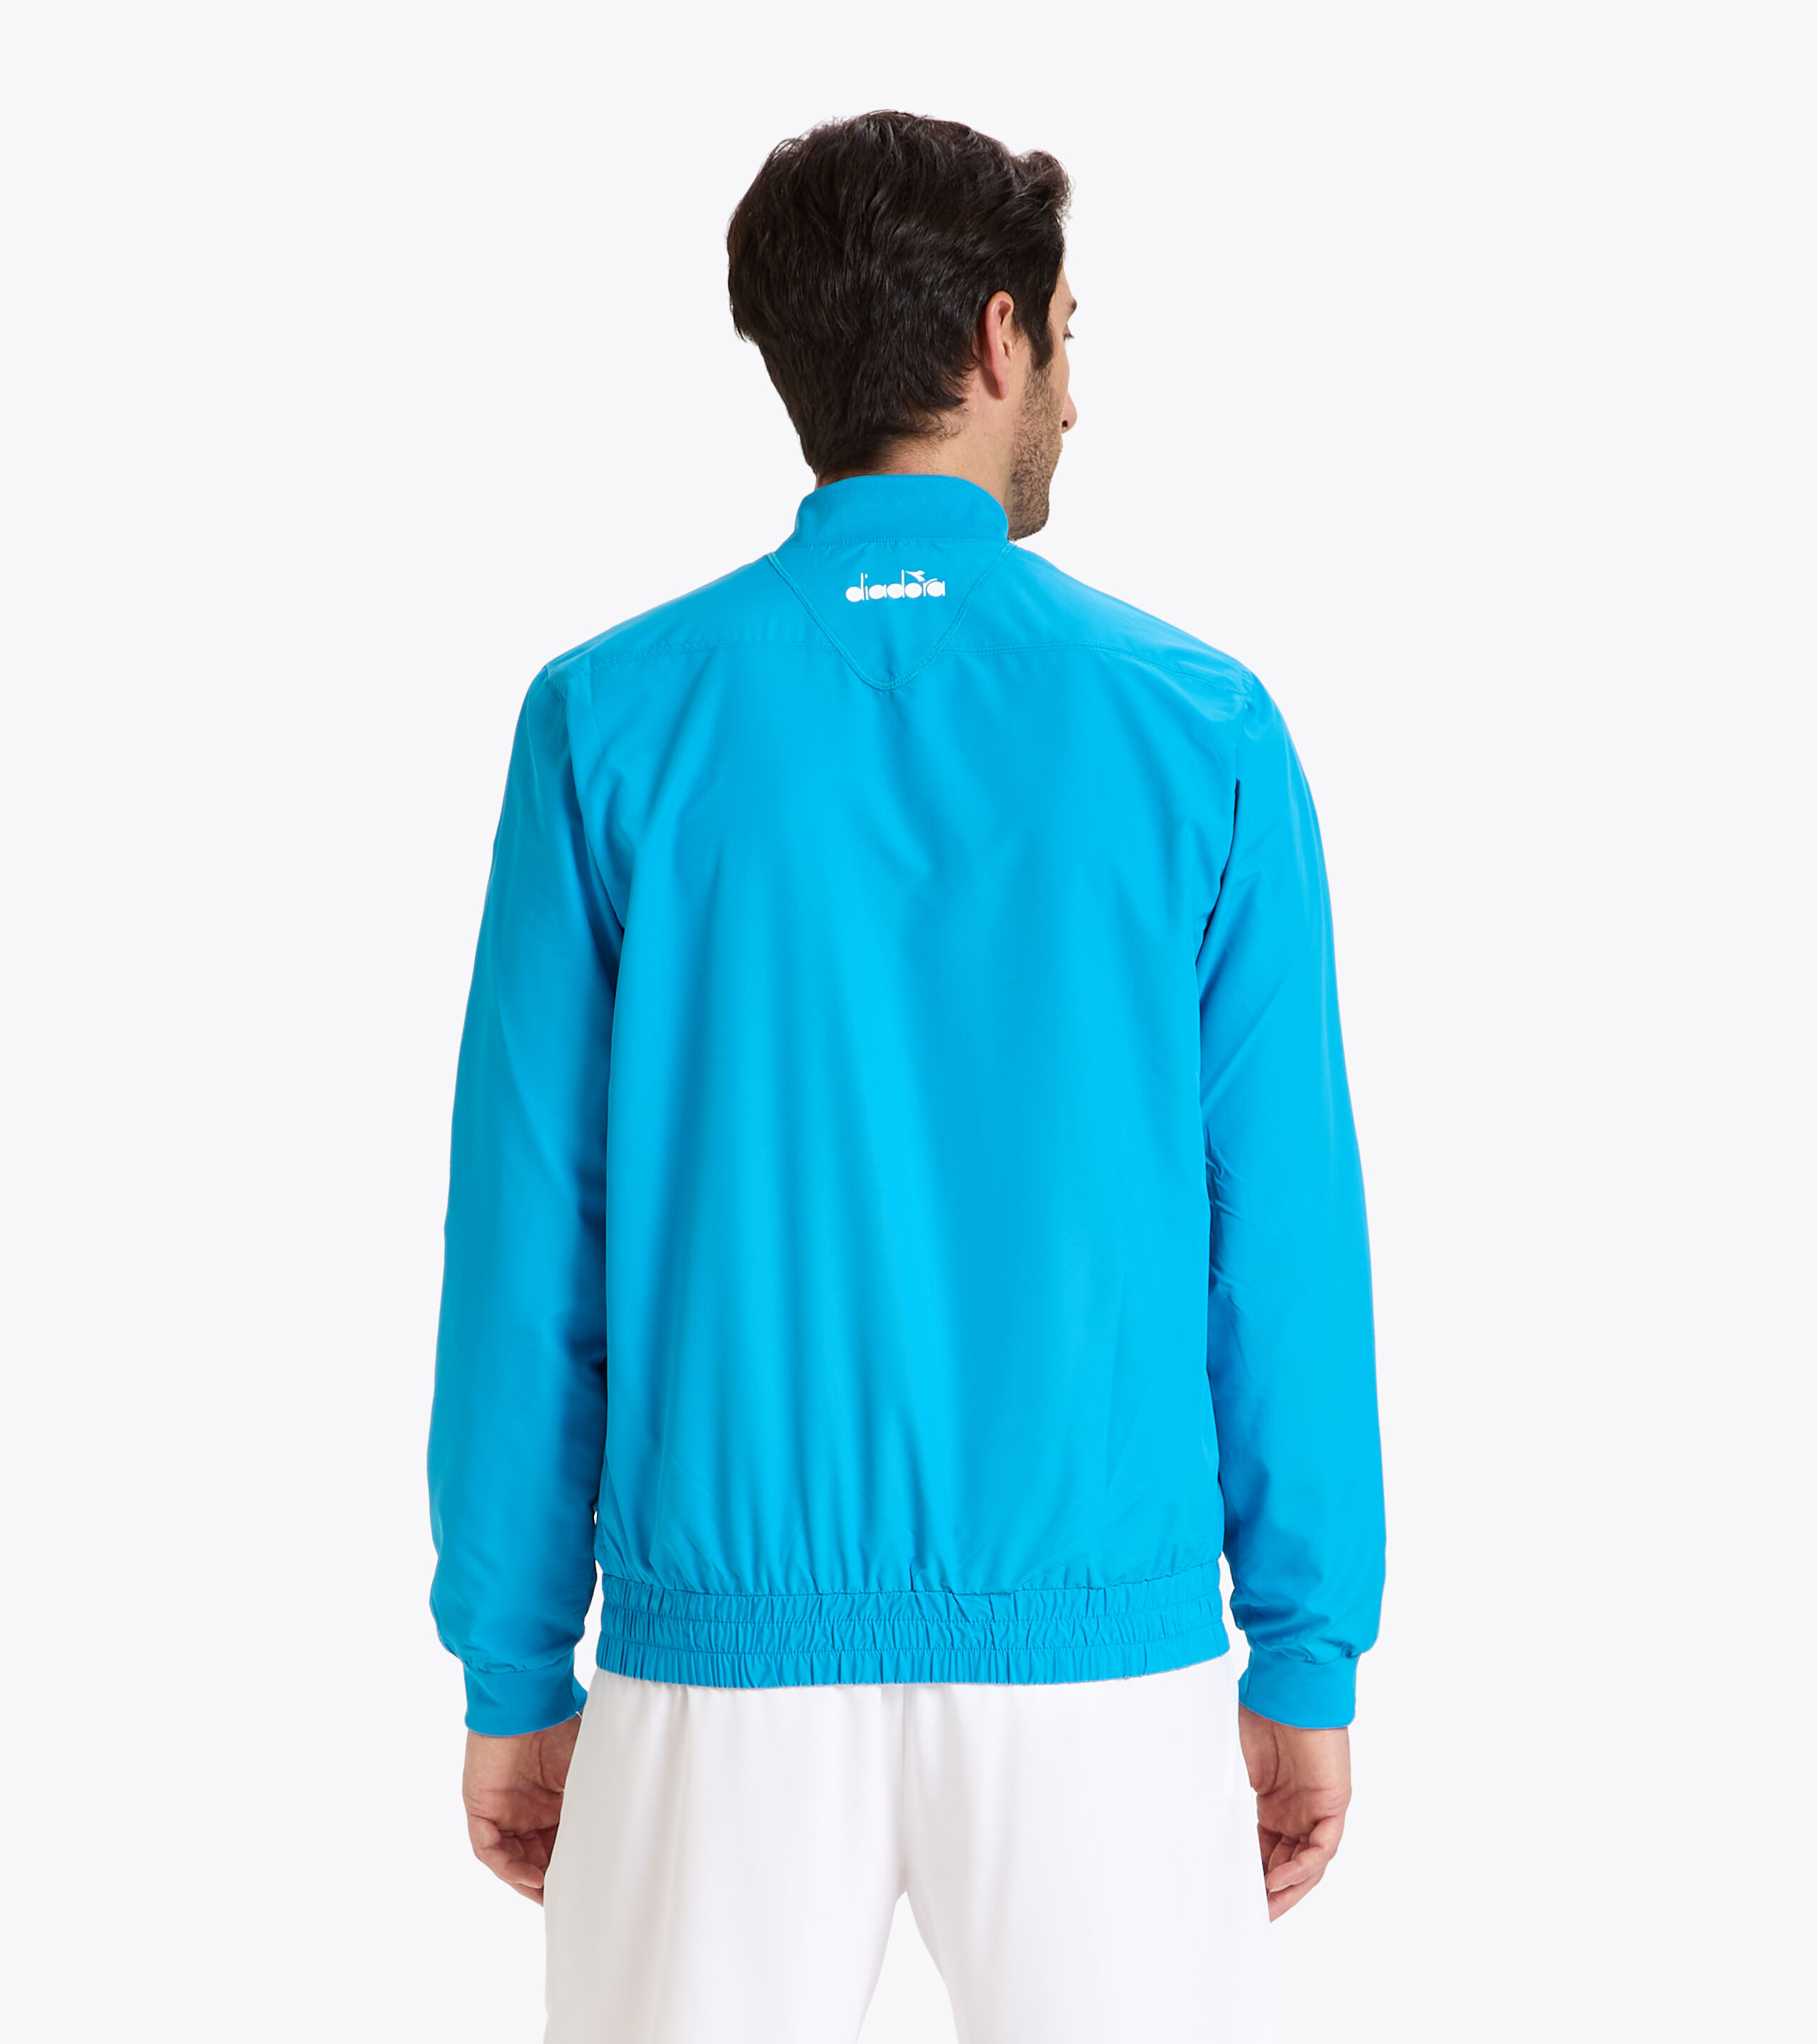 J Lindeberg Golf Primark Mens Jackets 2023 Autumn Outdoors Coat For Tennis  And Korean Luxury Clothing From Tradingmk, $24.03 | DHgate.Com